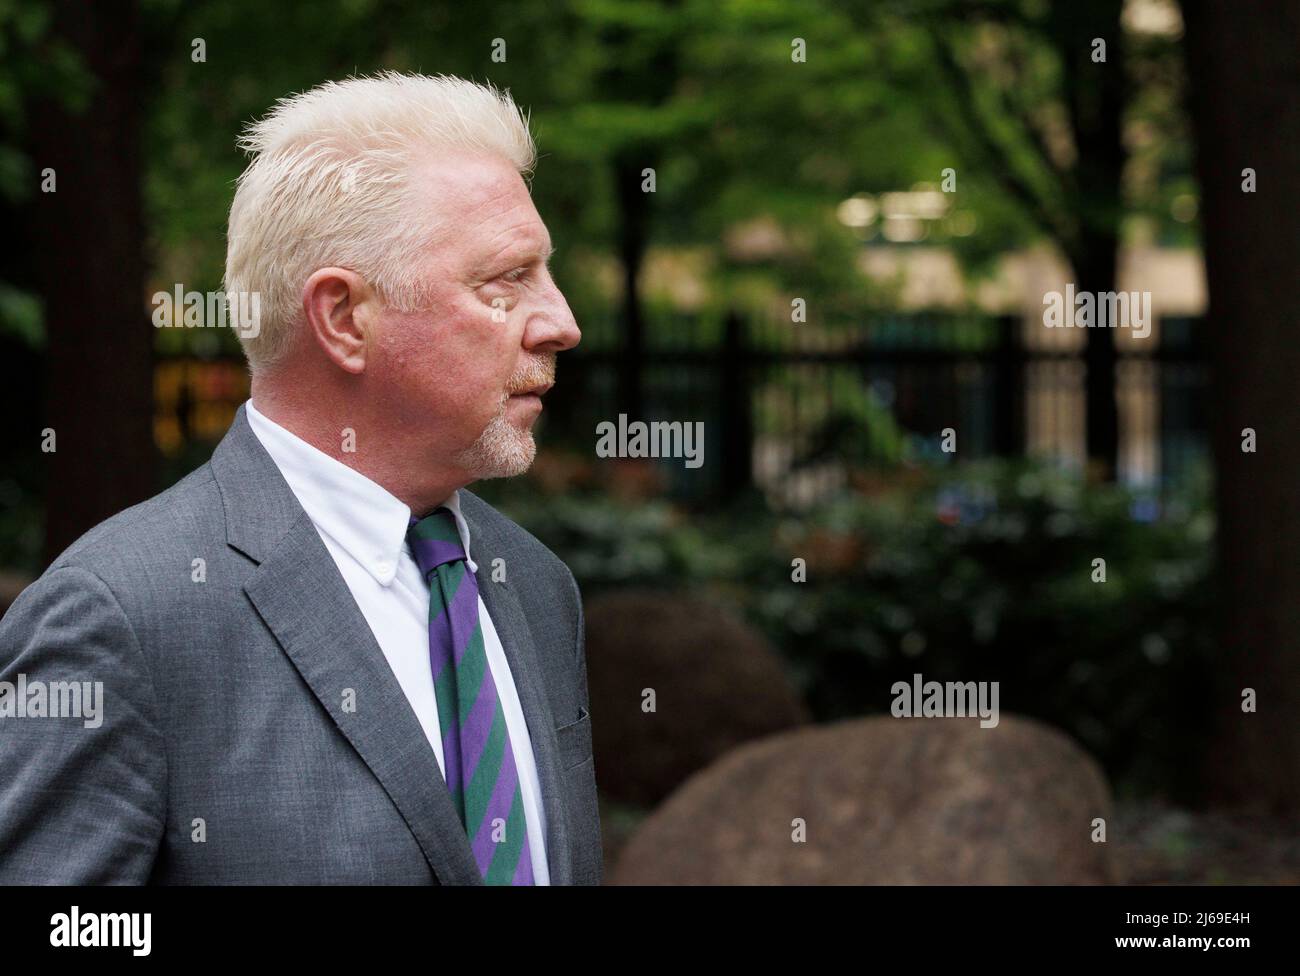 London, UK 29 Apr Former 3 time Wimbledon champion, Boris Becker, arrives at Southwark Crown Court his girlfriend Lilian De Carvalho Monteiro, for sentencing in his Insolvency case. He is